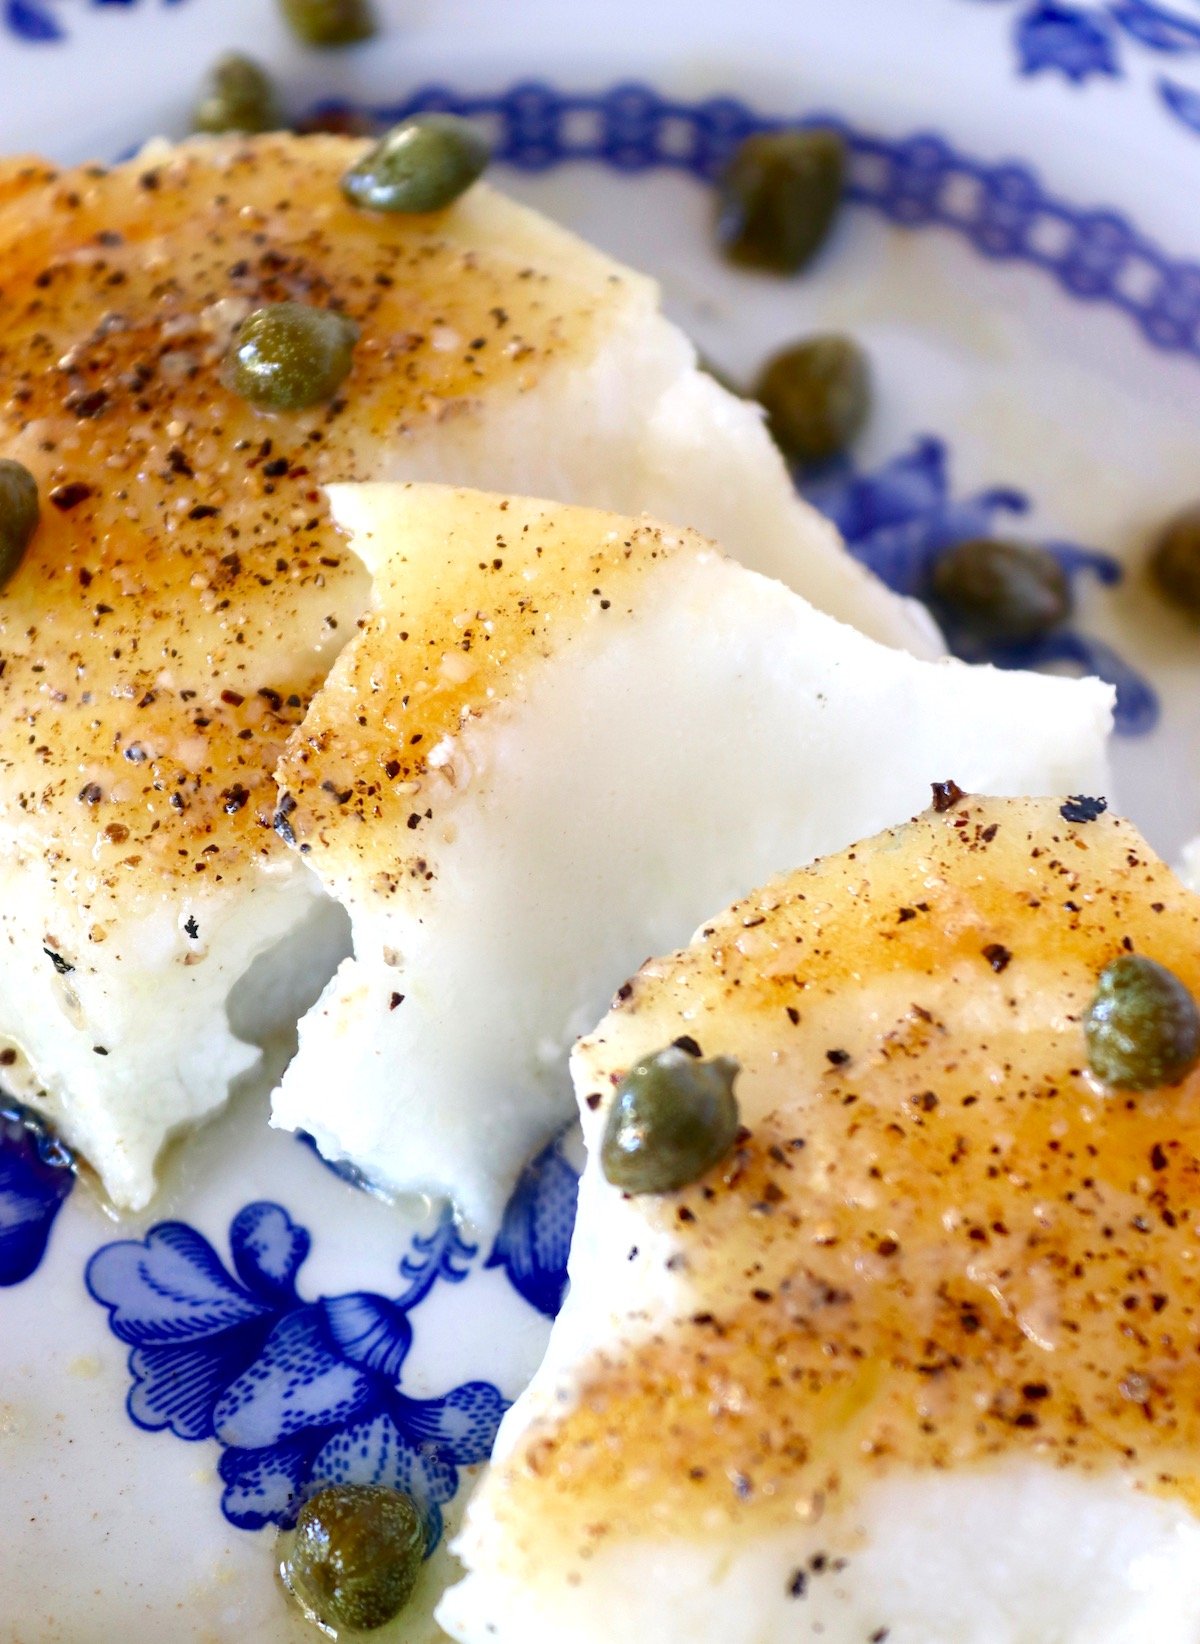 Seared and flaked Chilean Sea Bass (Patagonian Toothfish) on a blue and white plate with lemon-caper sauce.